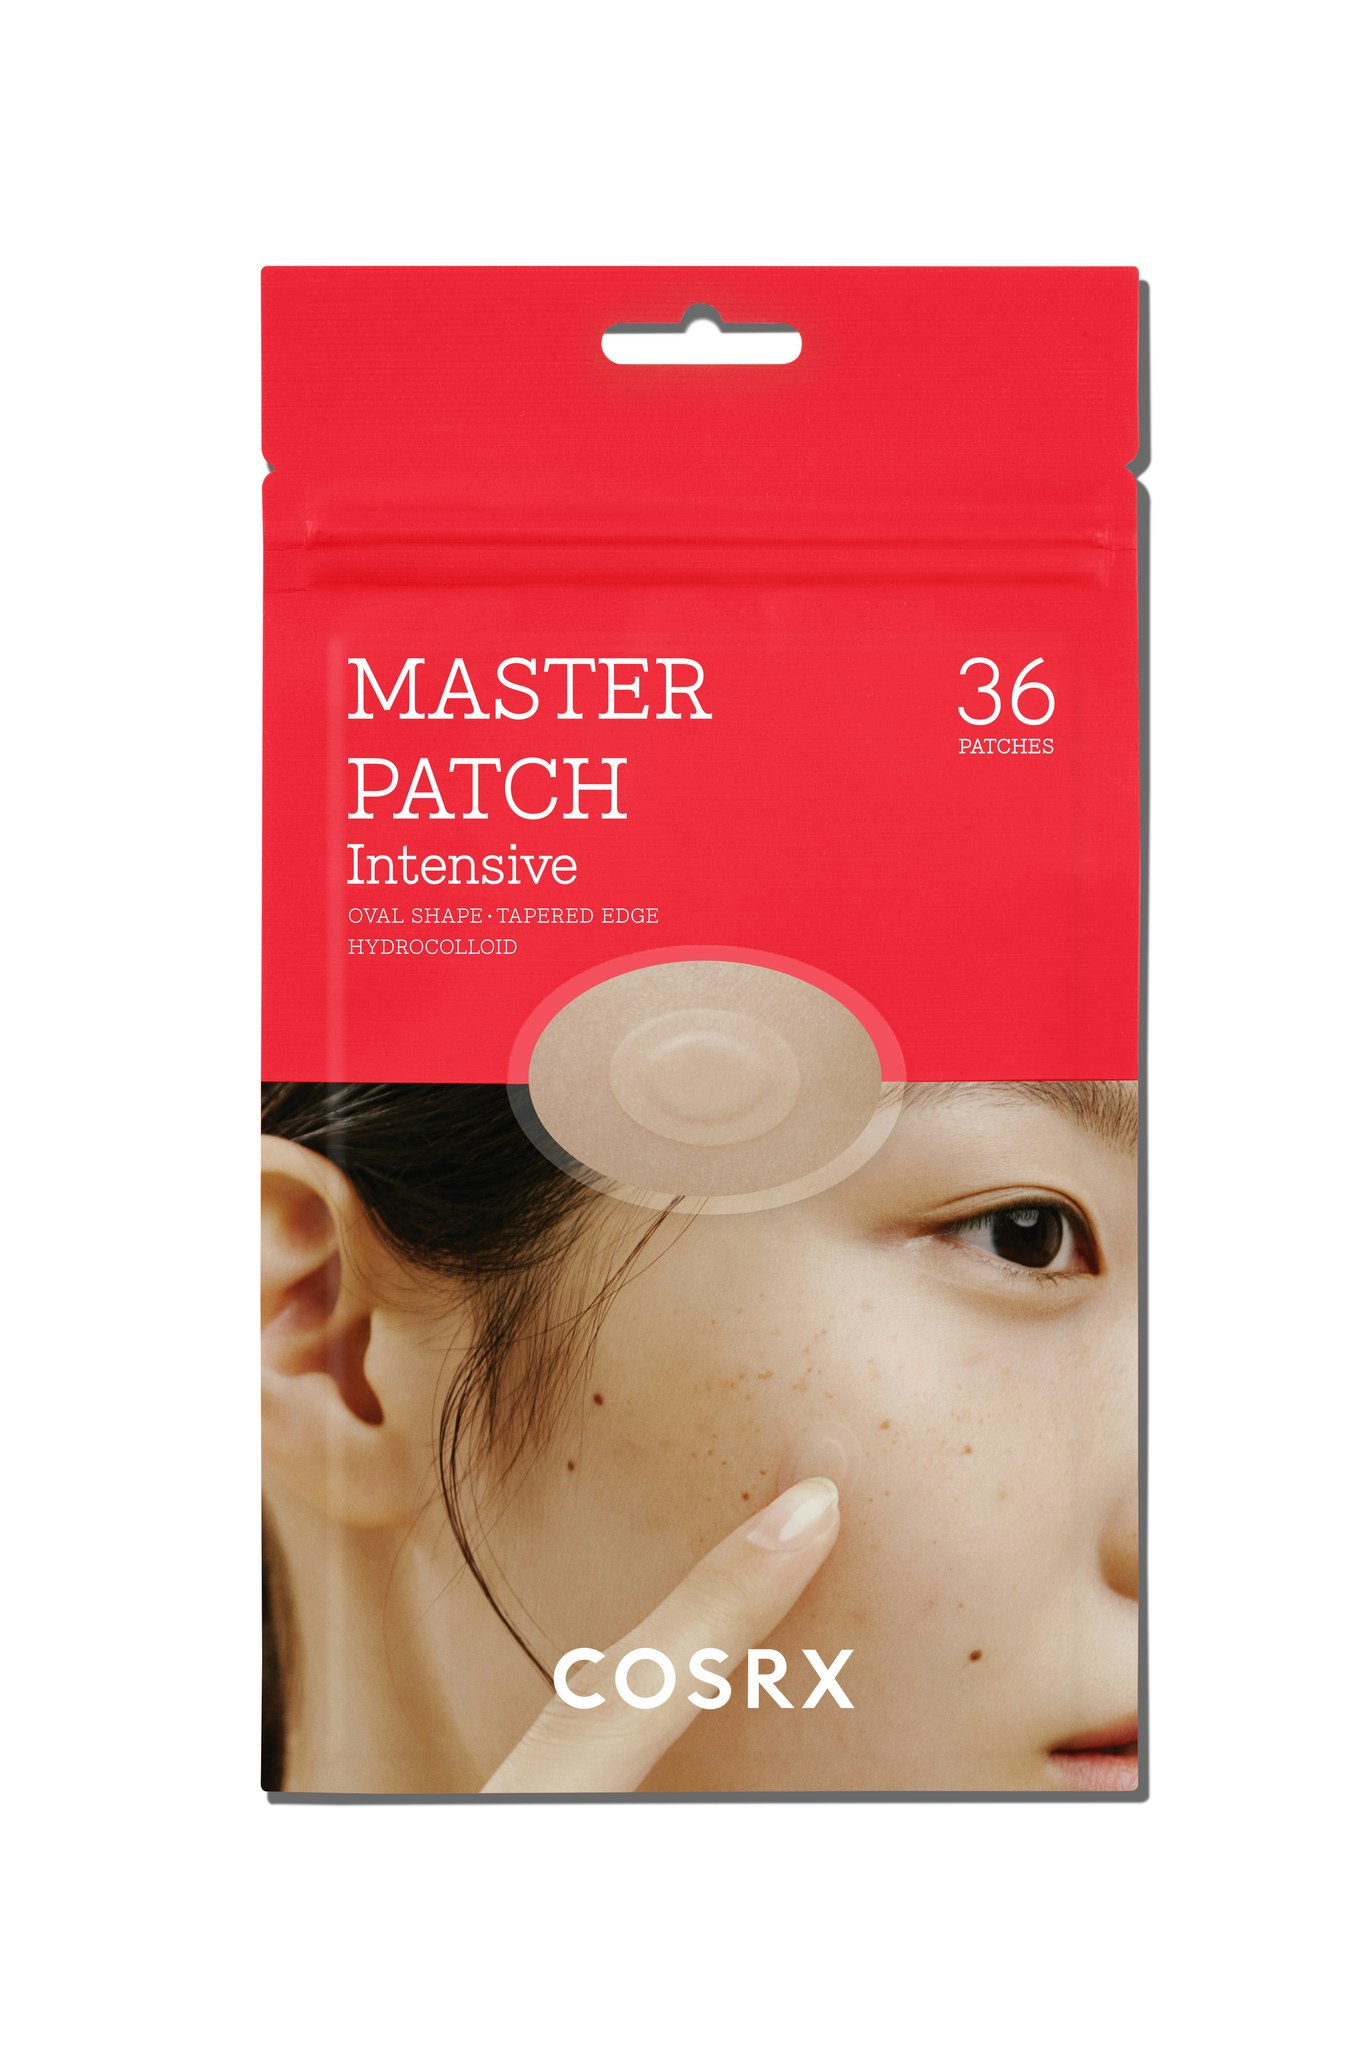 COSRX  Master Patch Intensive 36 Patches